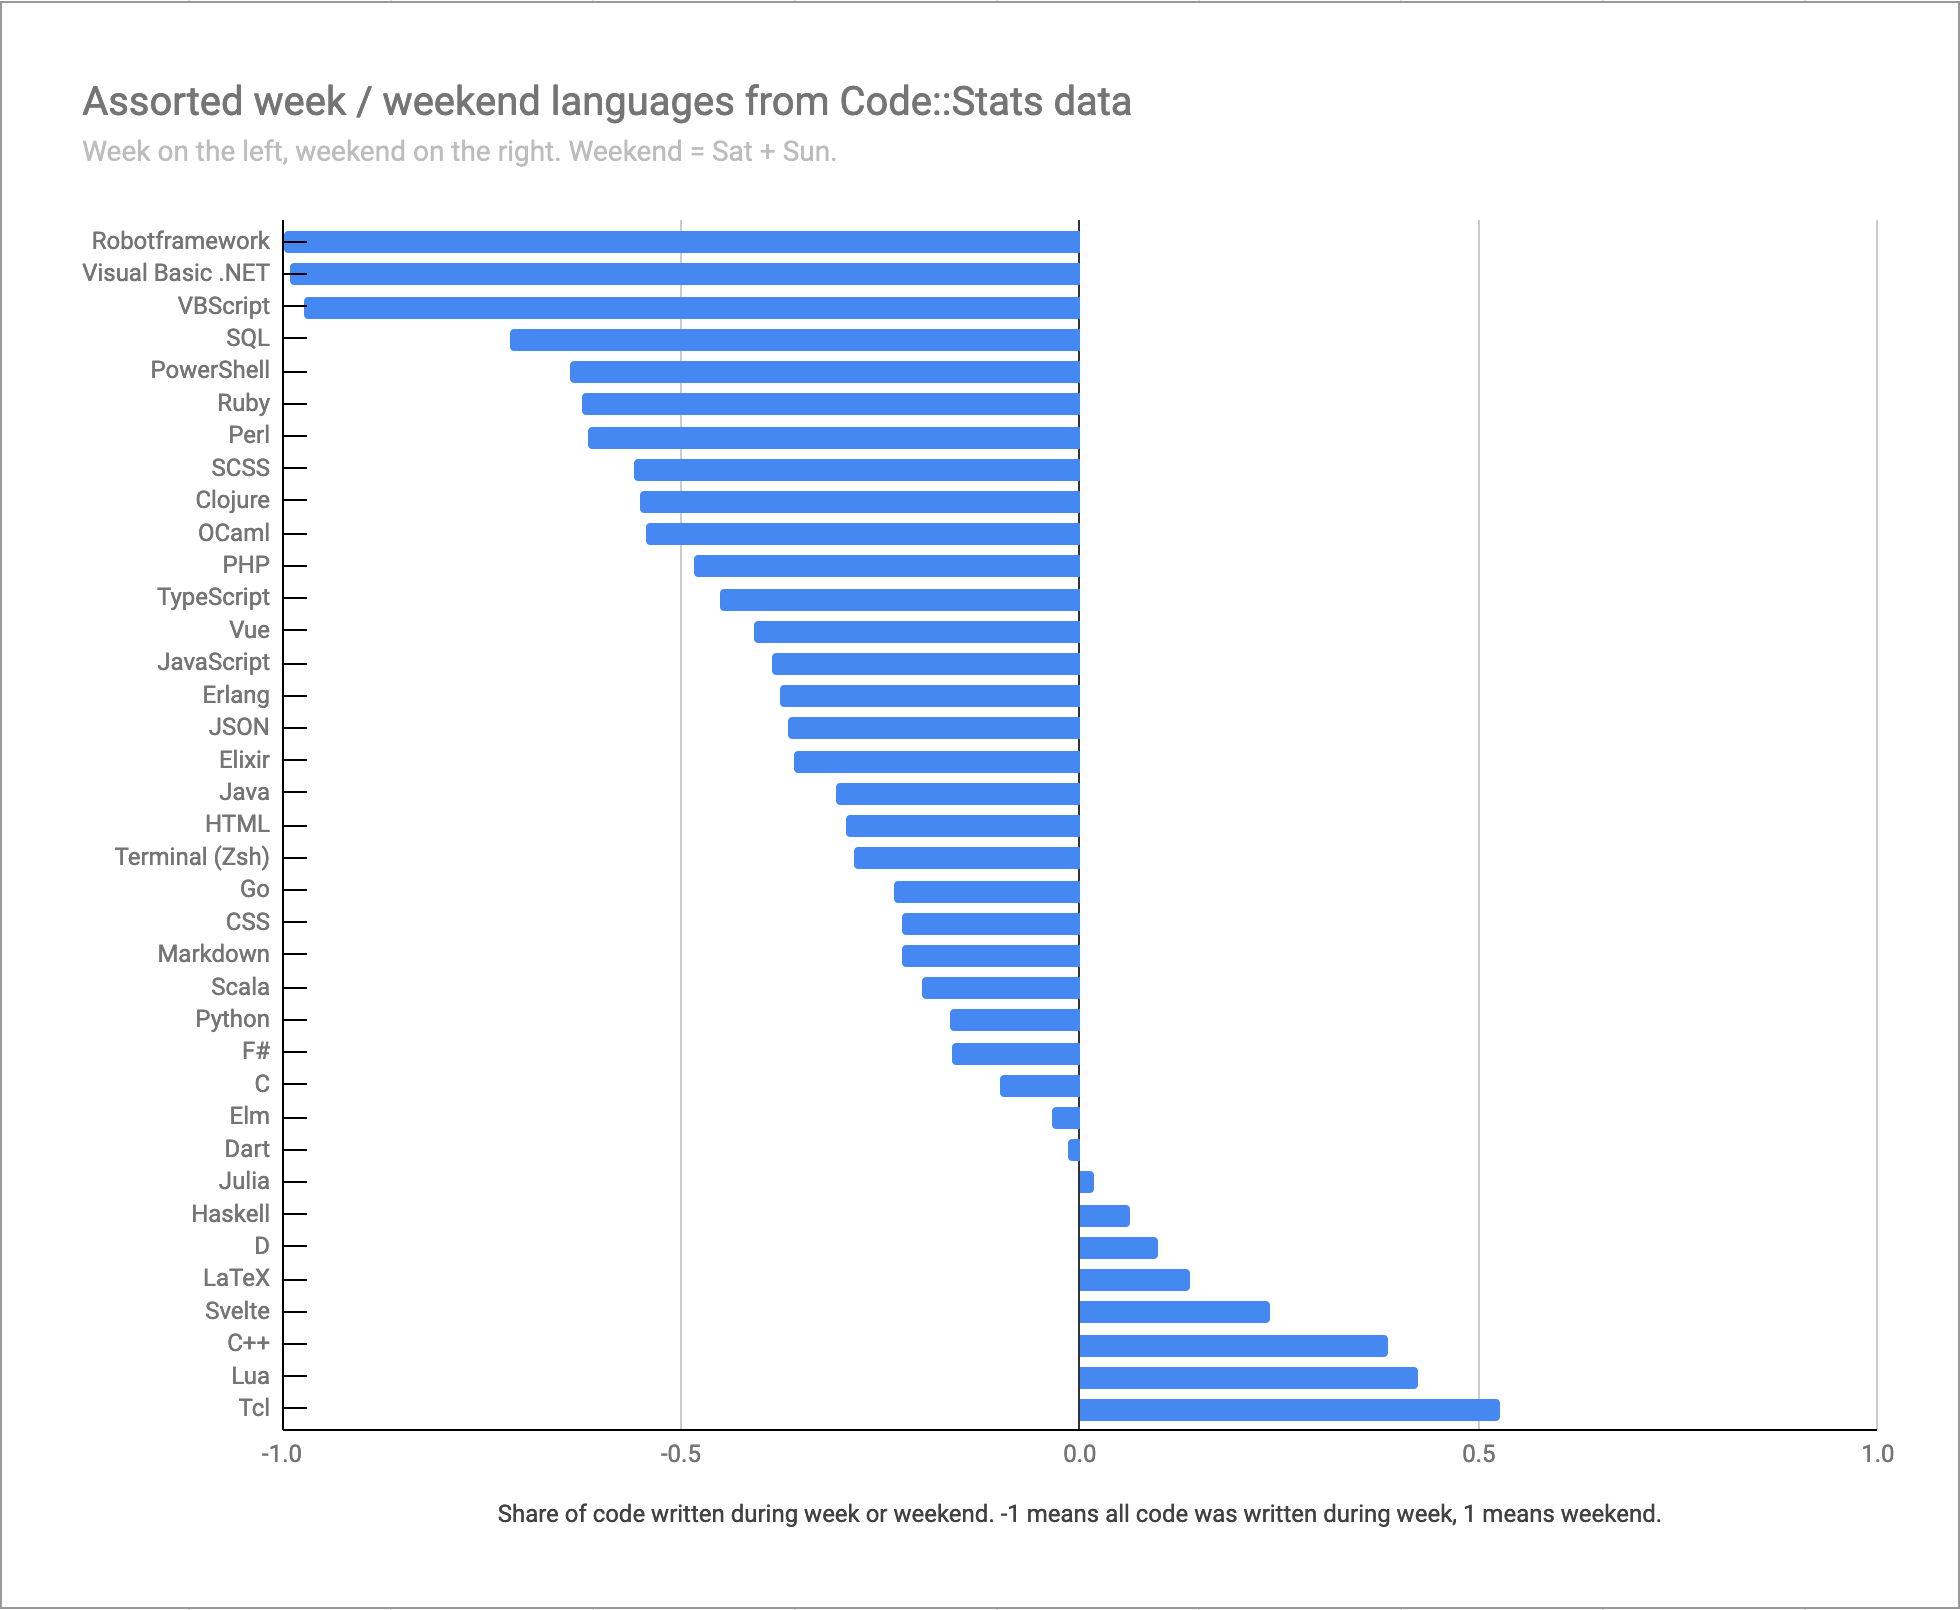 Bar chart of languages with them trending towards week or weekend usage.